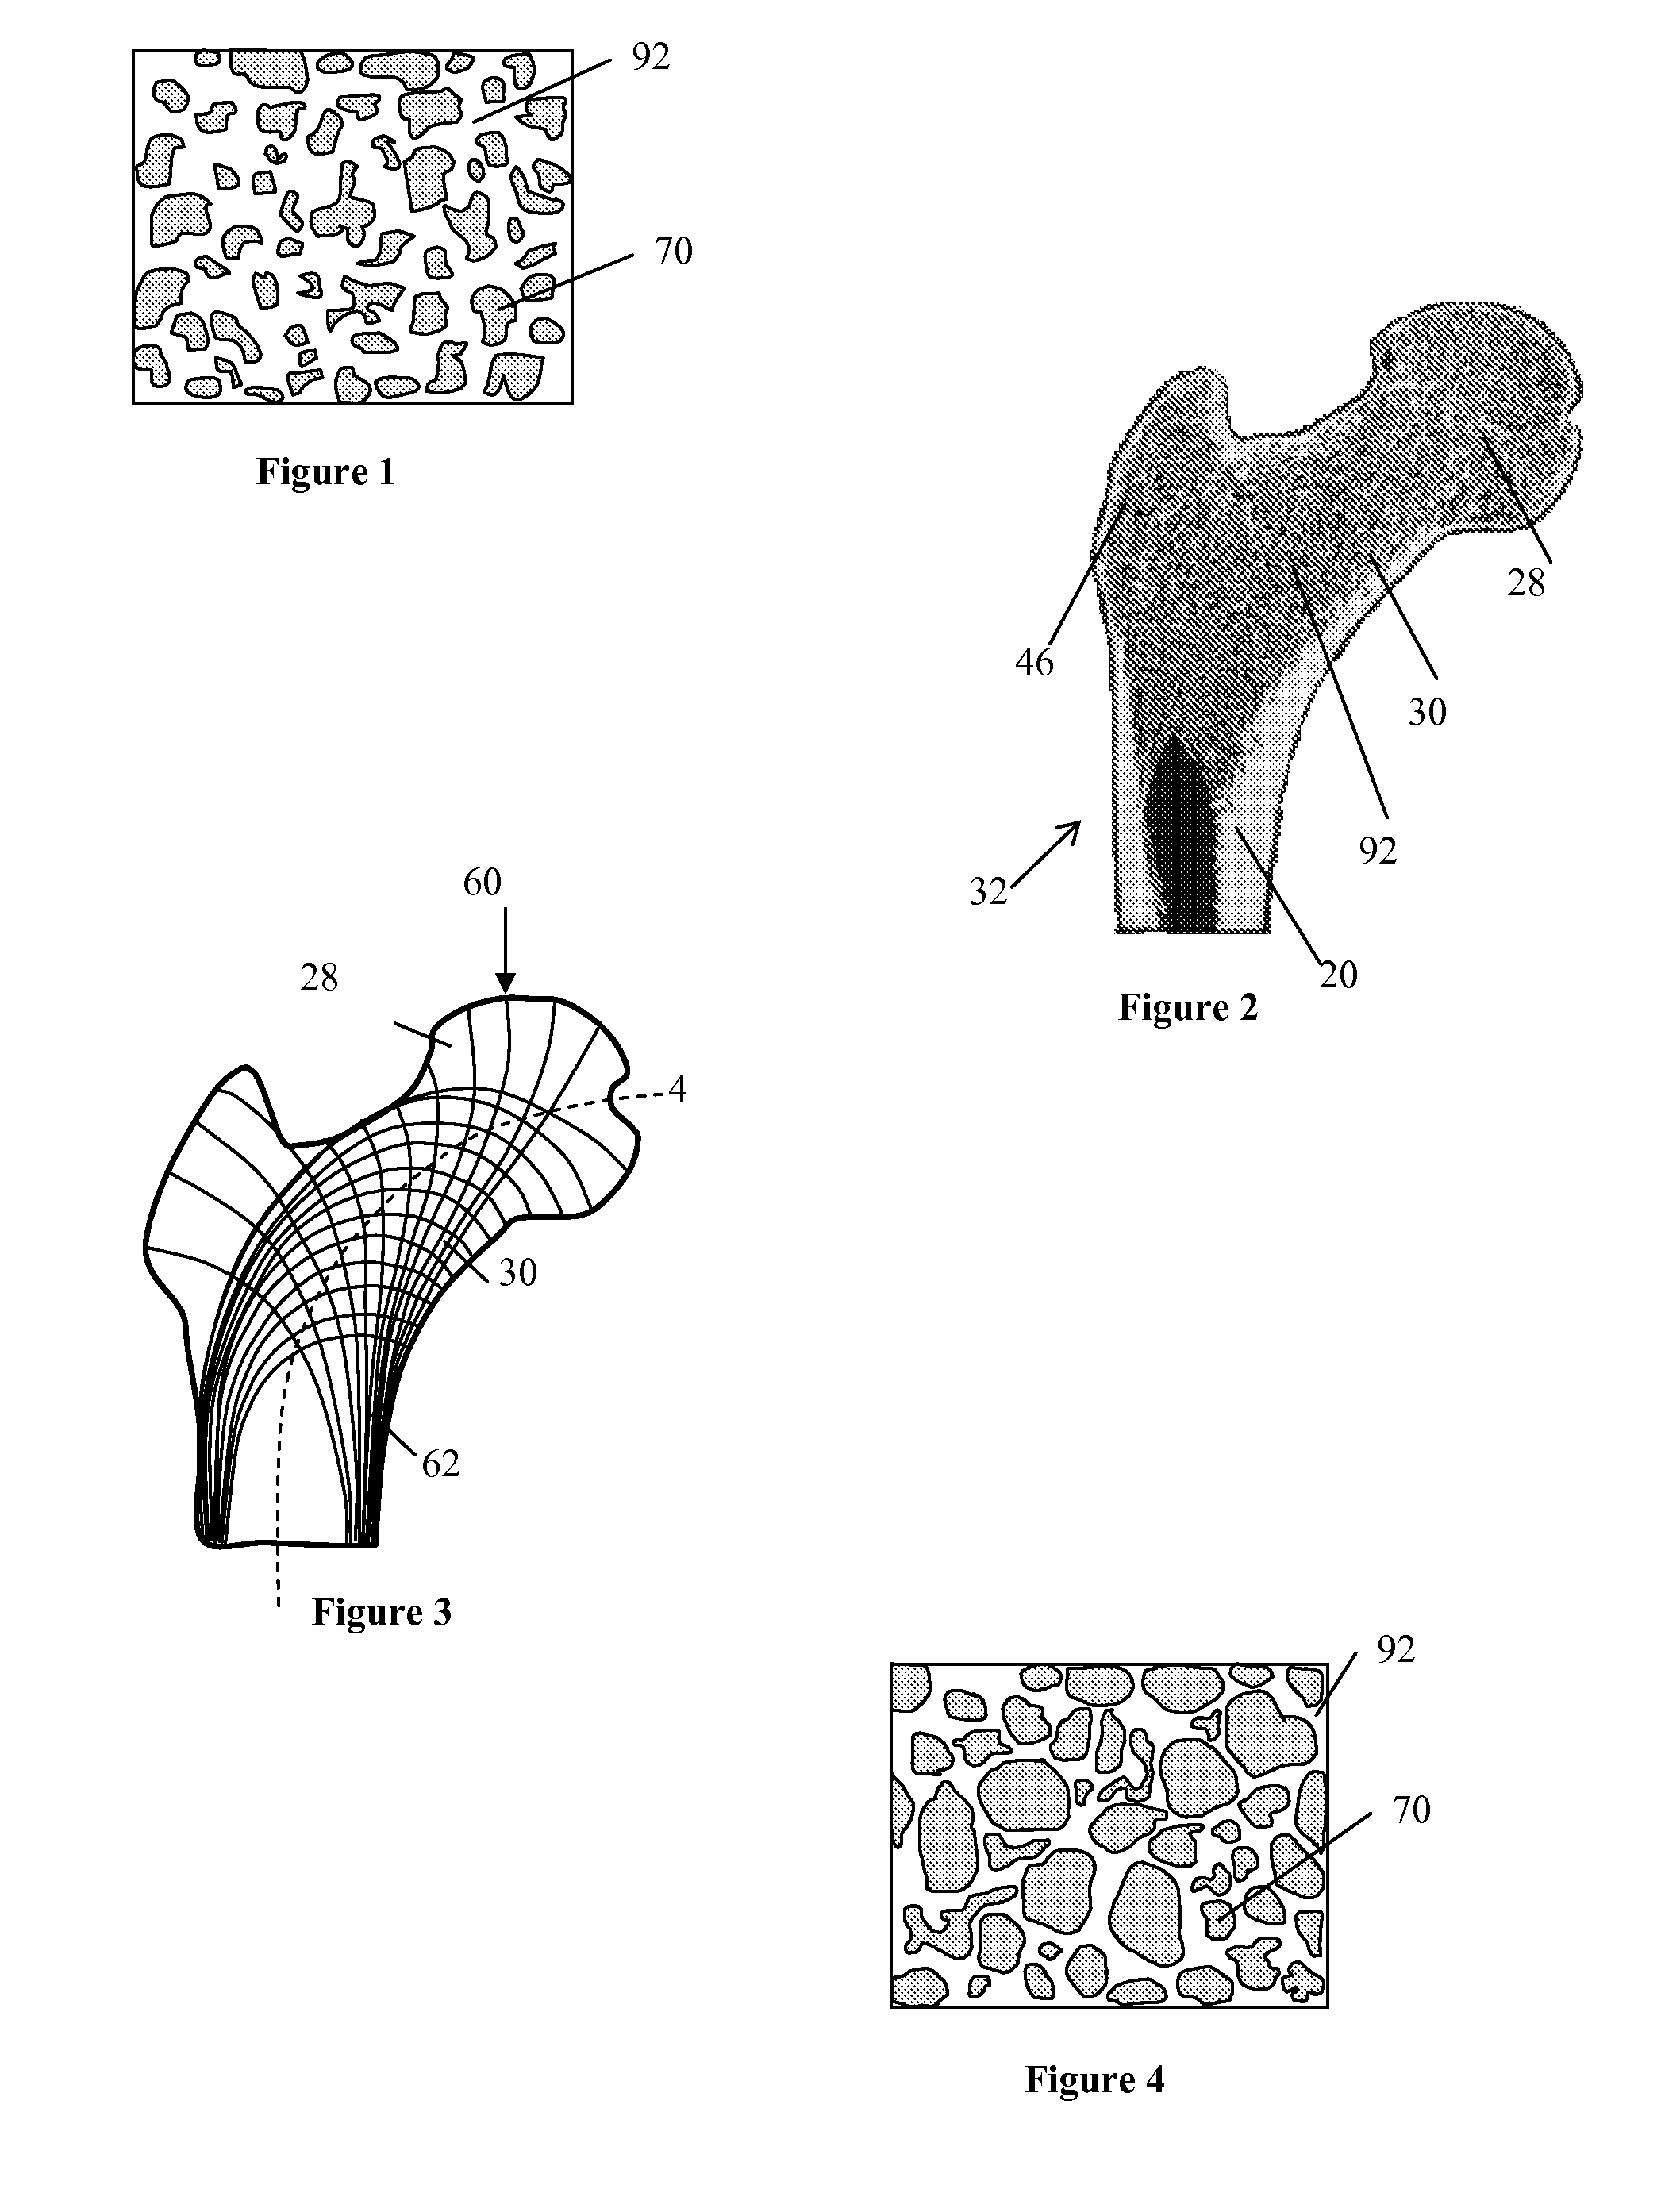 Bone support devices and methods